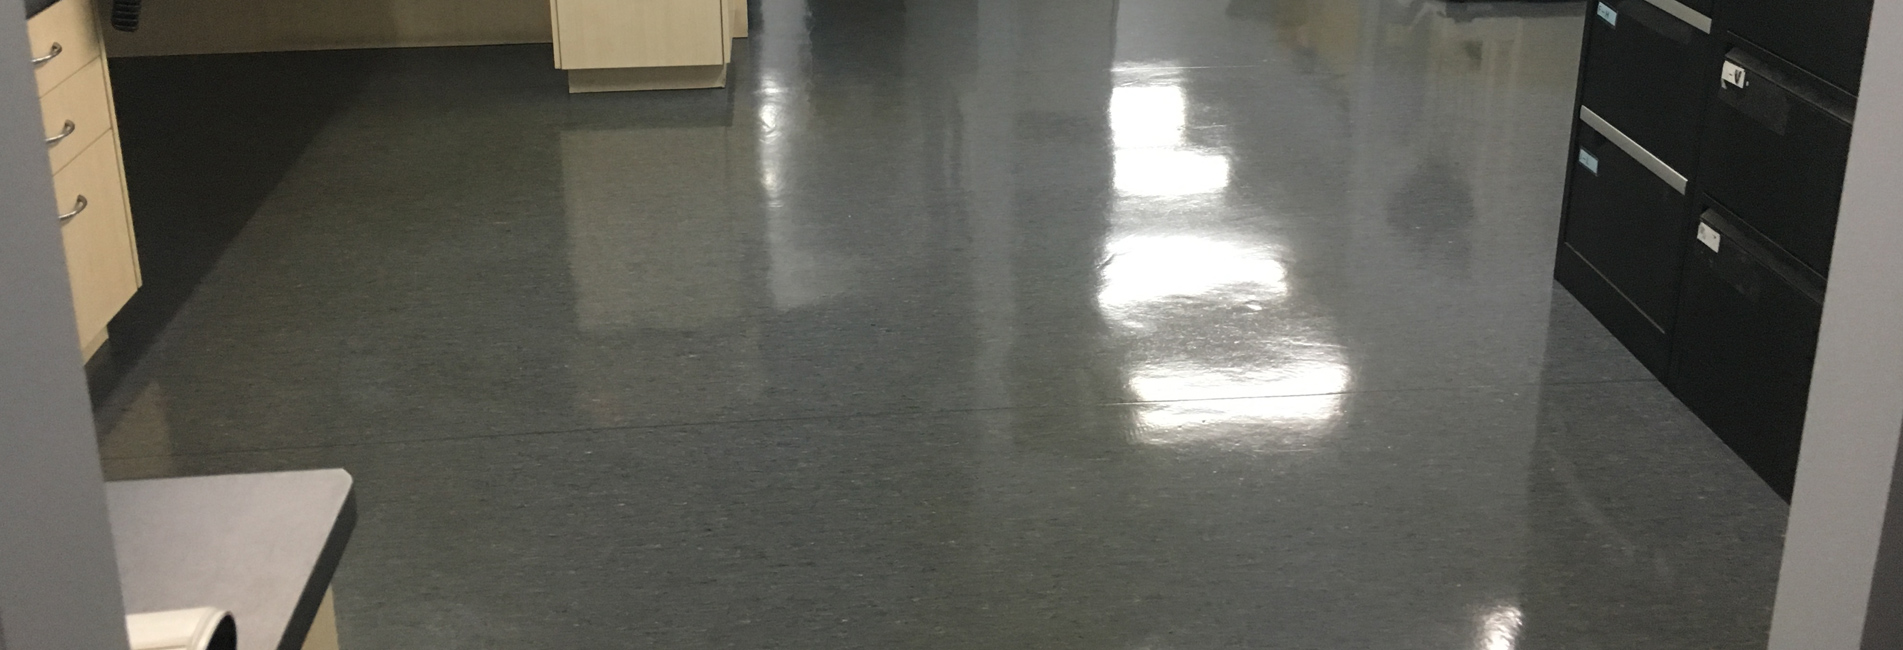 Vinyl Floor Sealing Sandstone Point, Medical Centre Cleaning QLD, Child Care Cleaning Toorbul, Commercial Cleaning Bribie Island, Stripping & Sealing Ningi, Office Cleaning Beachmere